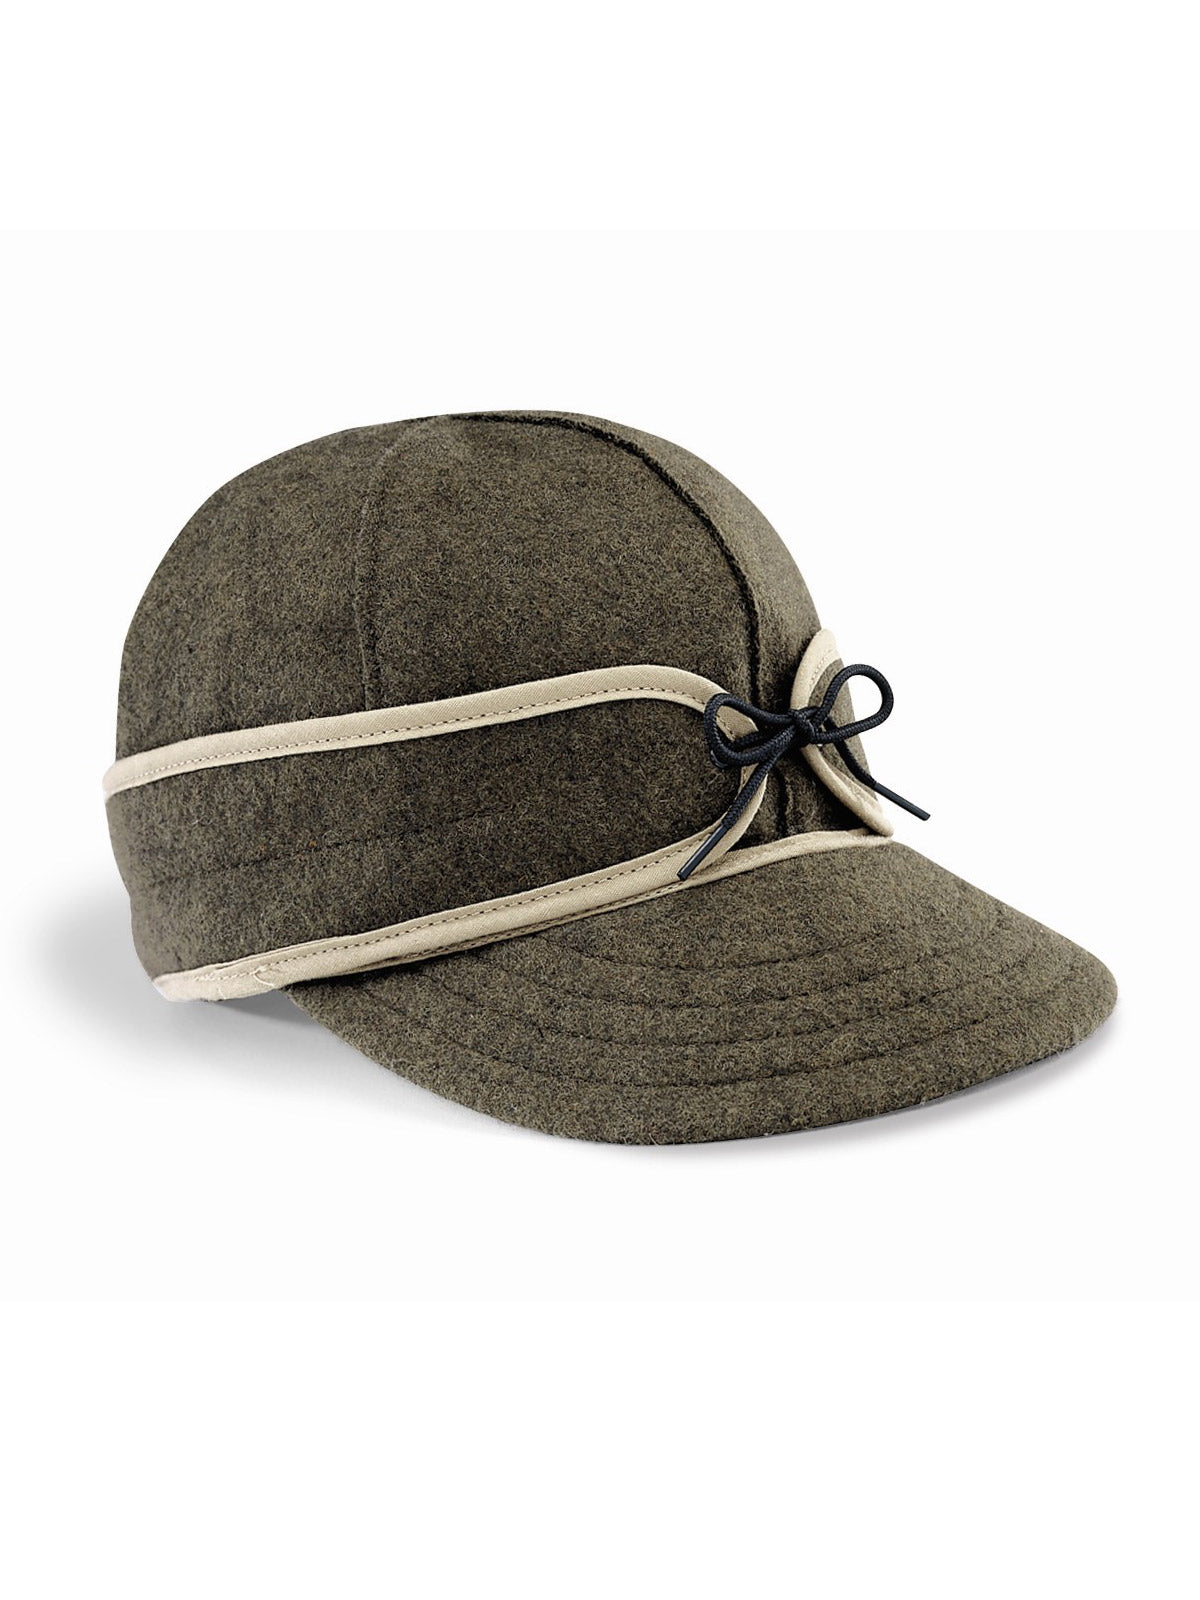 Origional Stormy Kromer Caps With Ear Band in Olive - 50010-OLV